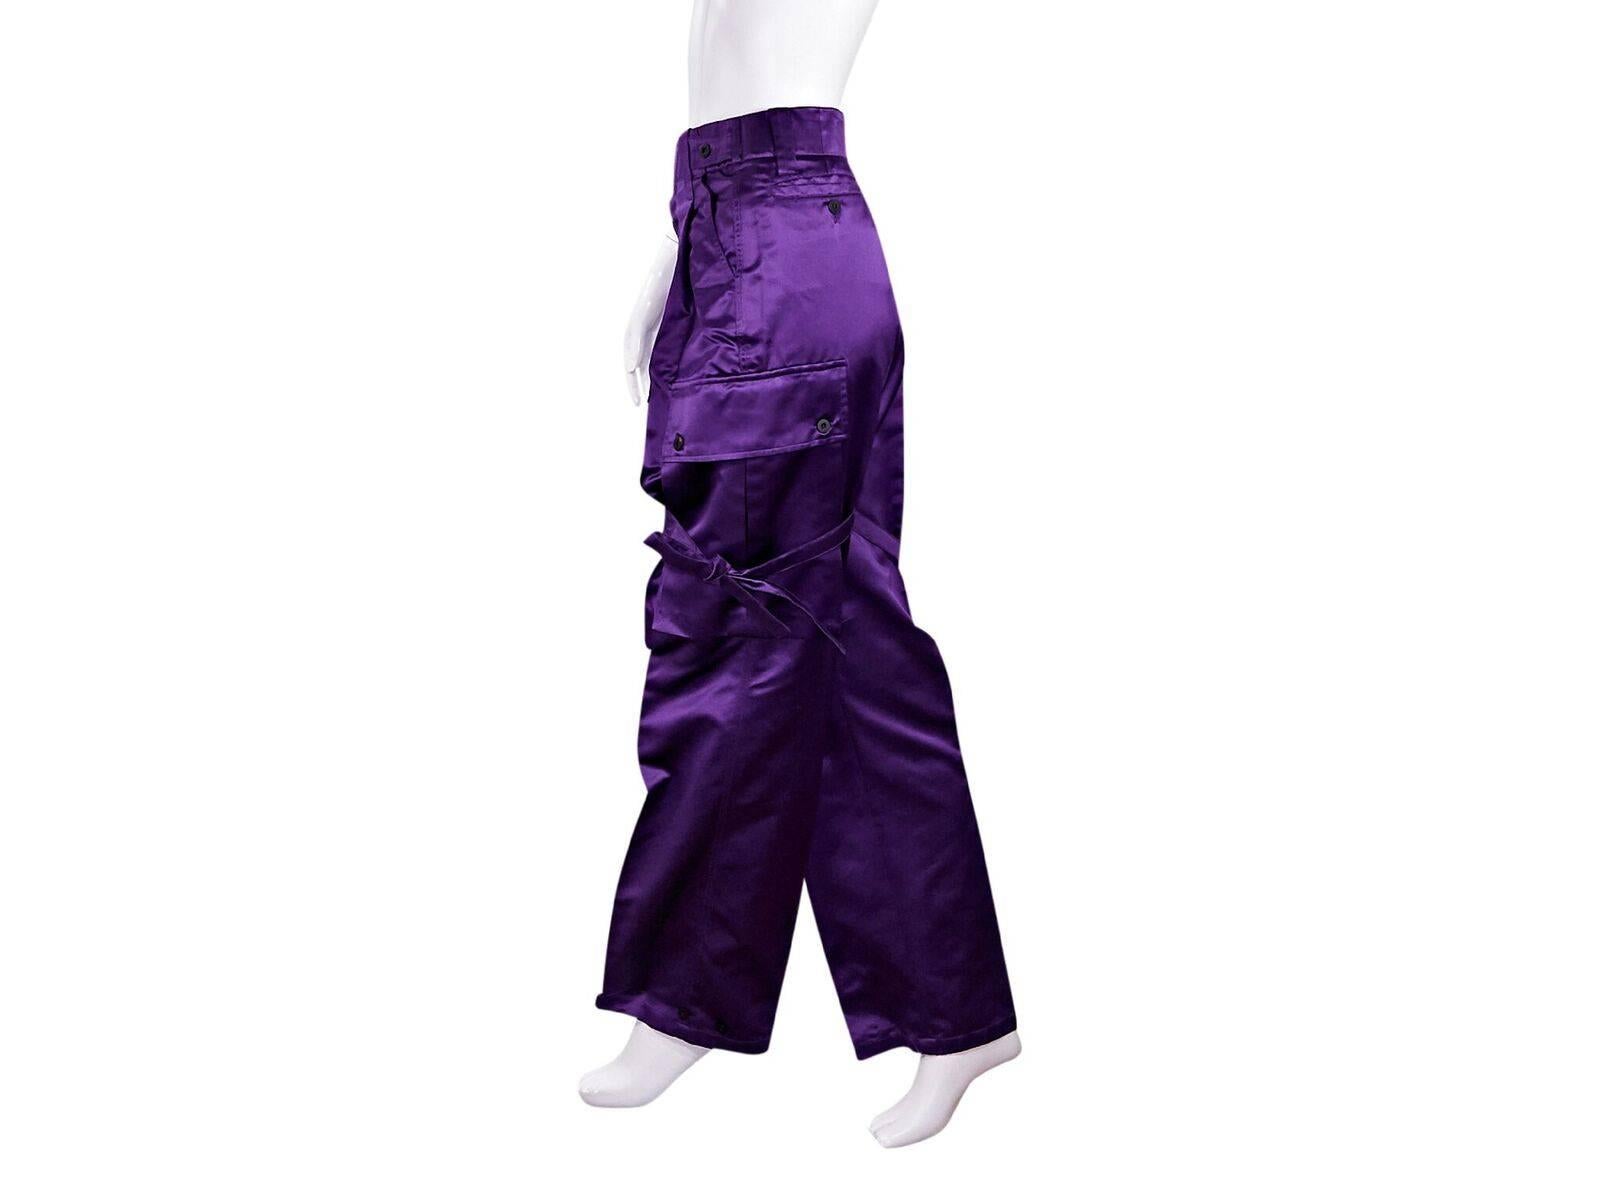 Product details:  Vintage purple silk-blend cargo pants by Gucci.  From the Tom Ford era.  Looped waist.  Concealed hook and zip fly closure.  Waist slide pockets.  Button flap cargo pockets.  Back button besom pocket.  Label size IT 40.  30